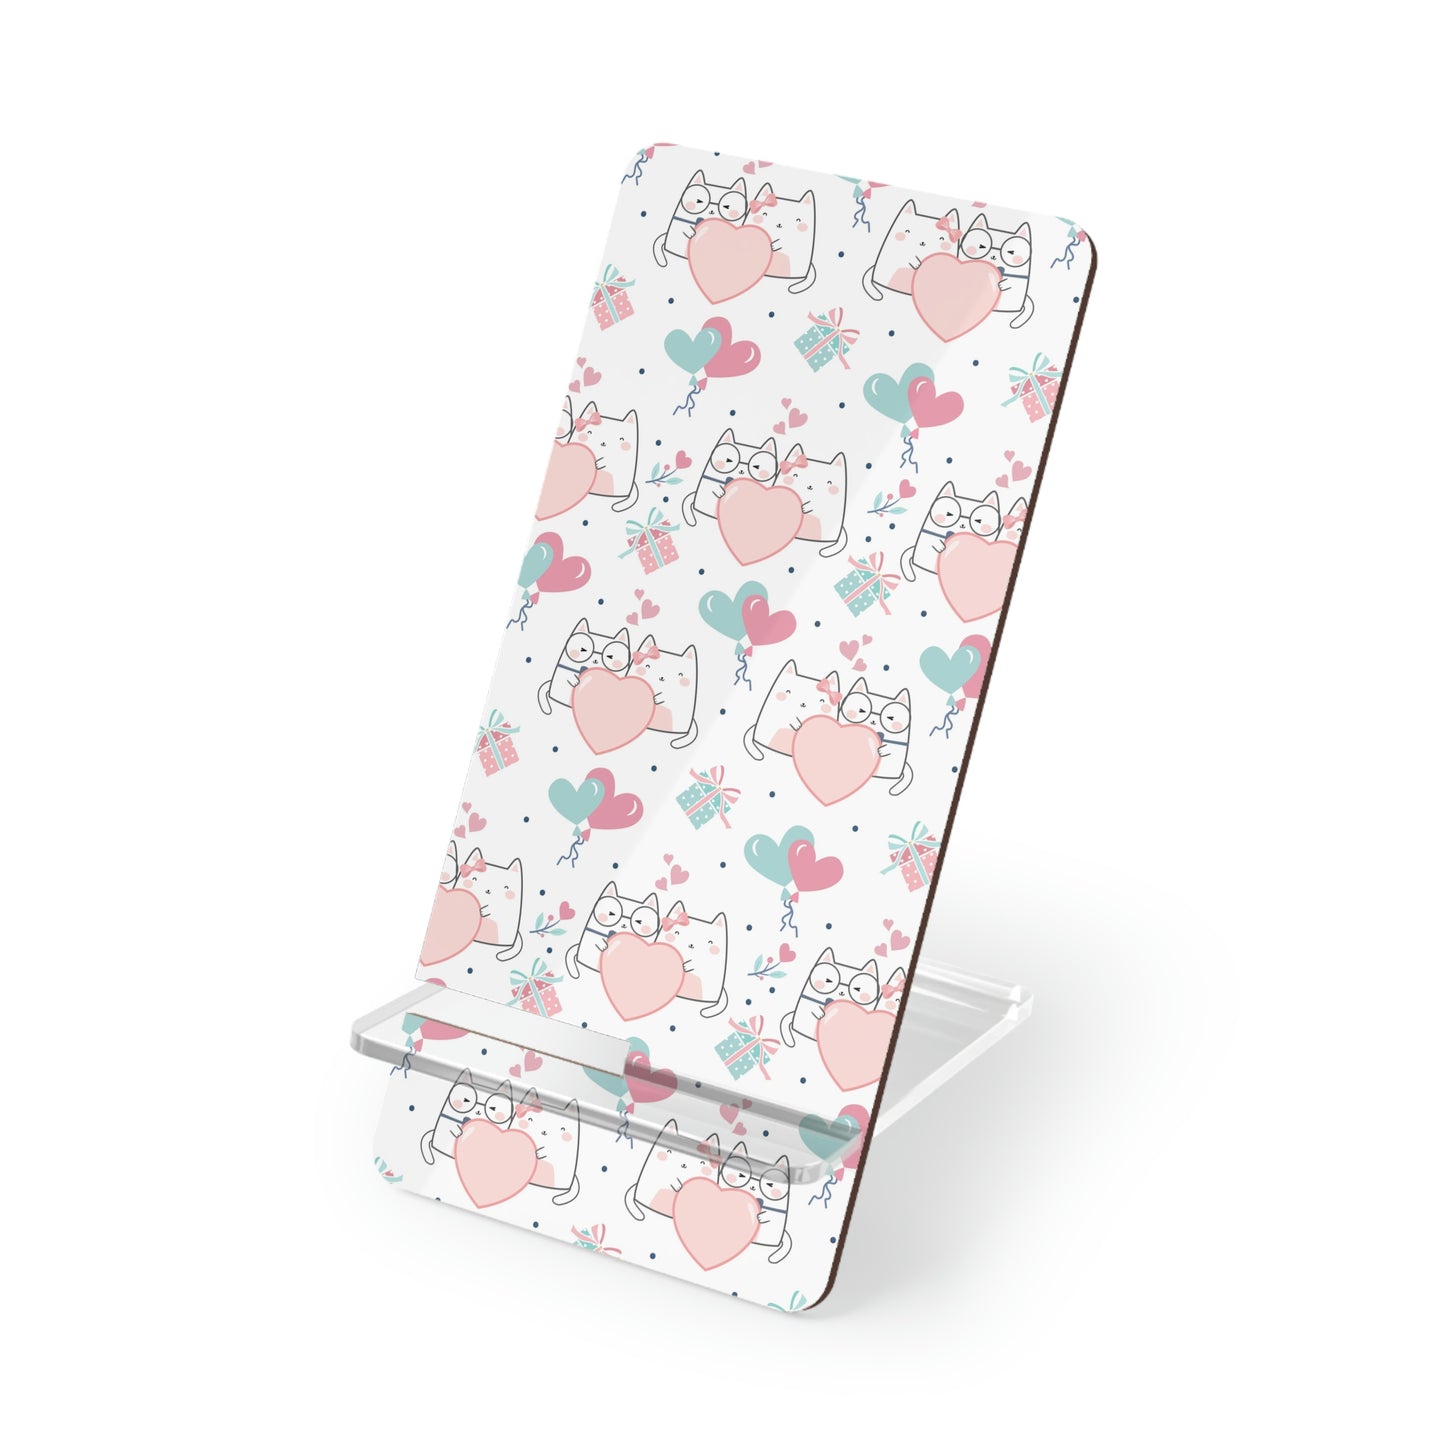 Kawaii Cats in Love Mobile Display Stand for Smartphones